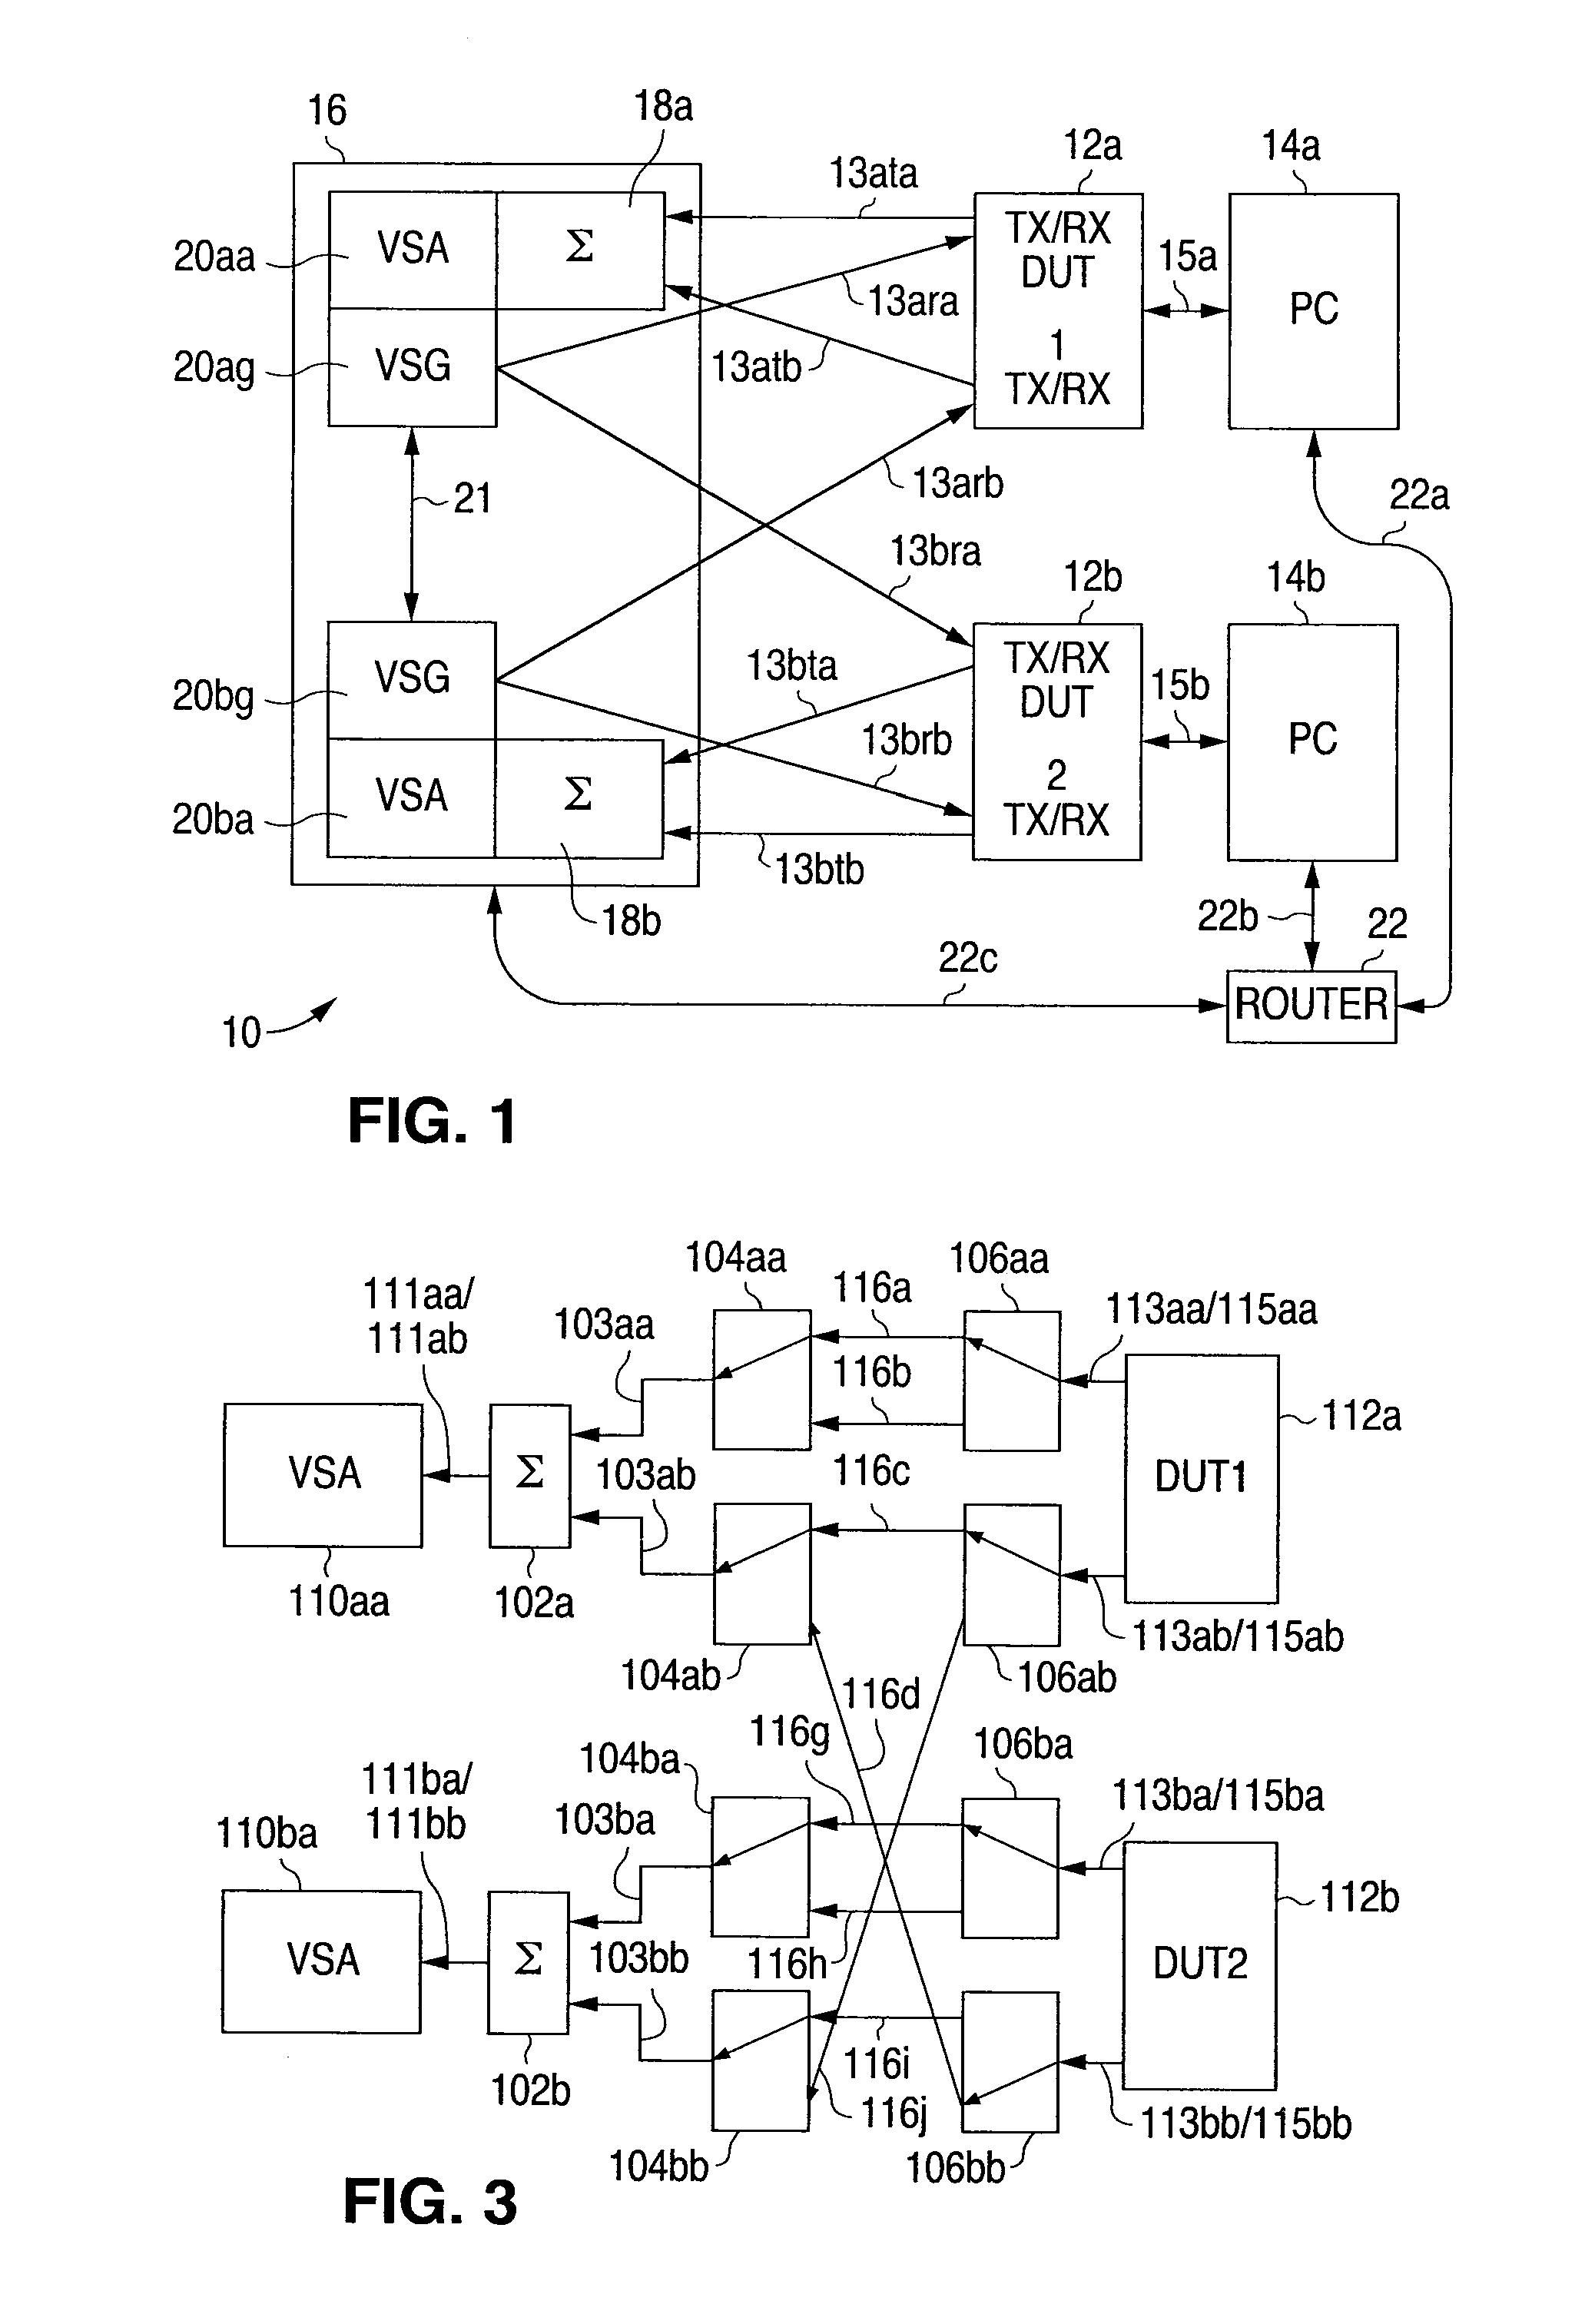 Digital communications test system for multiple input, multiple output (MIMO) systems